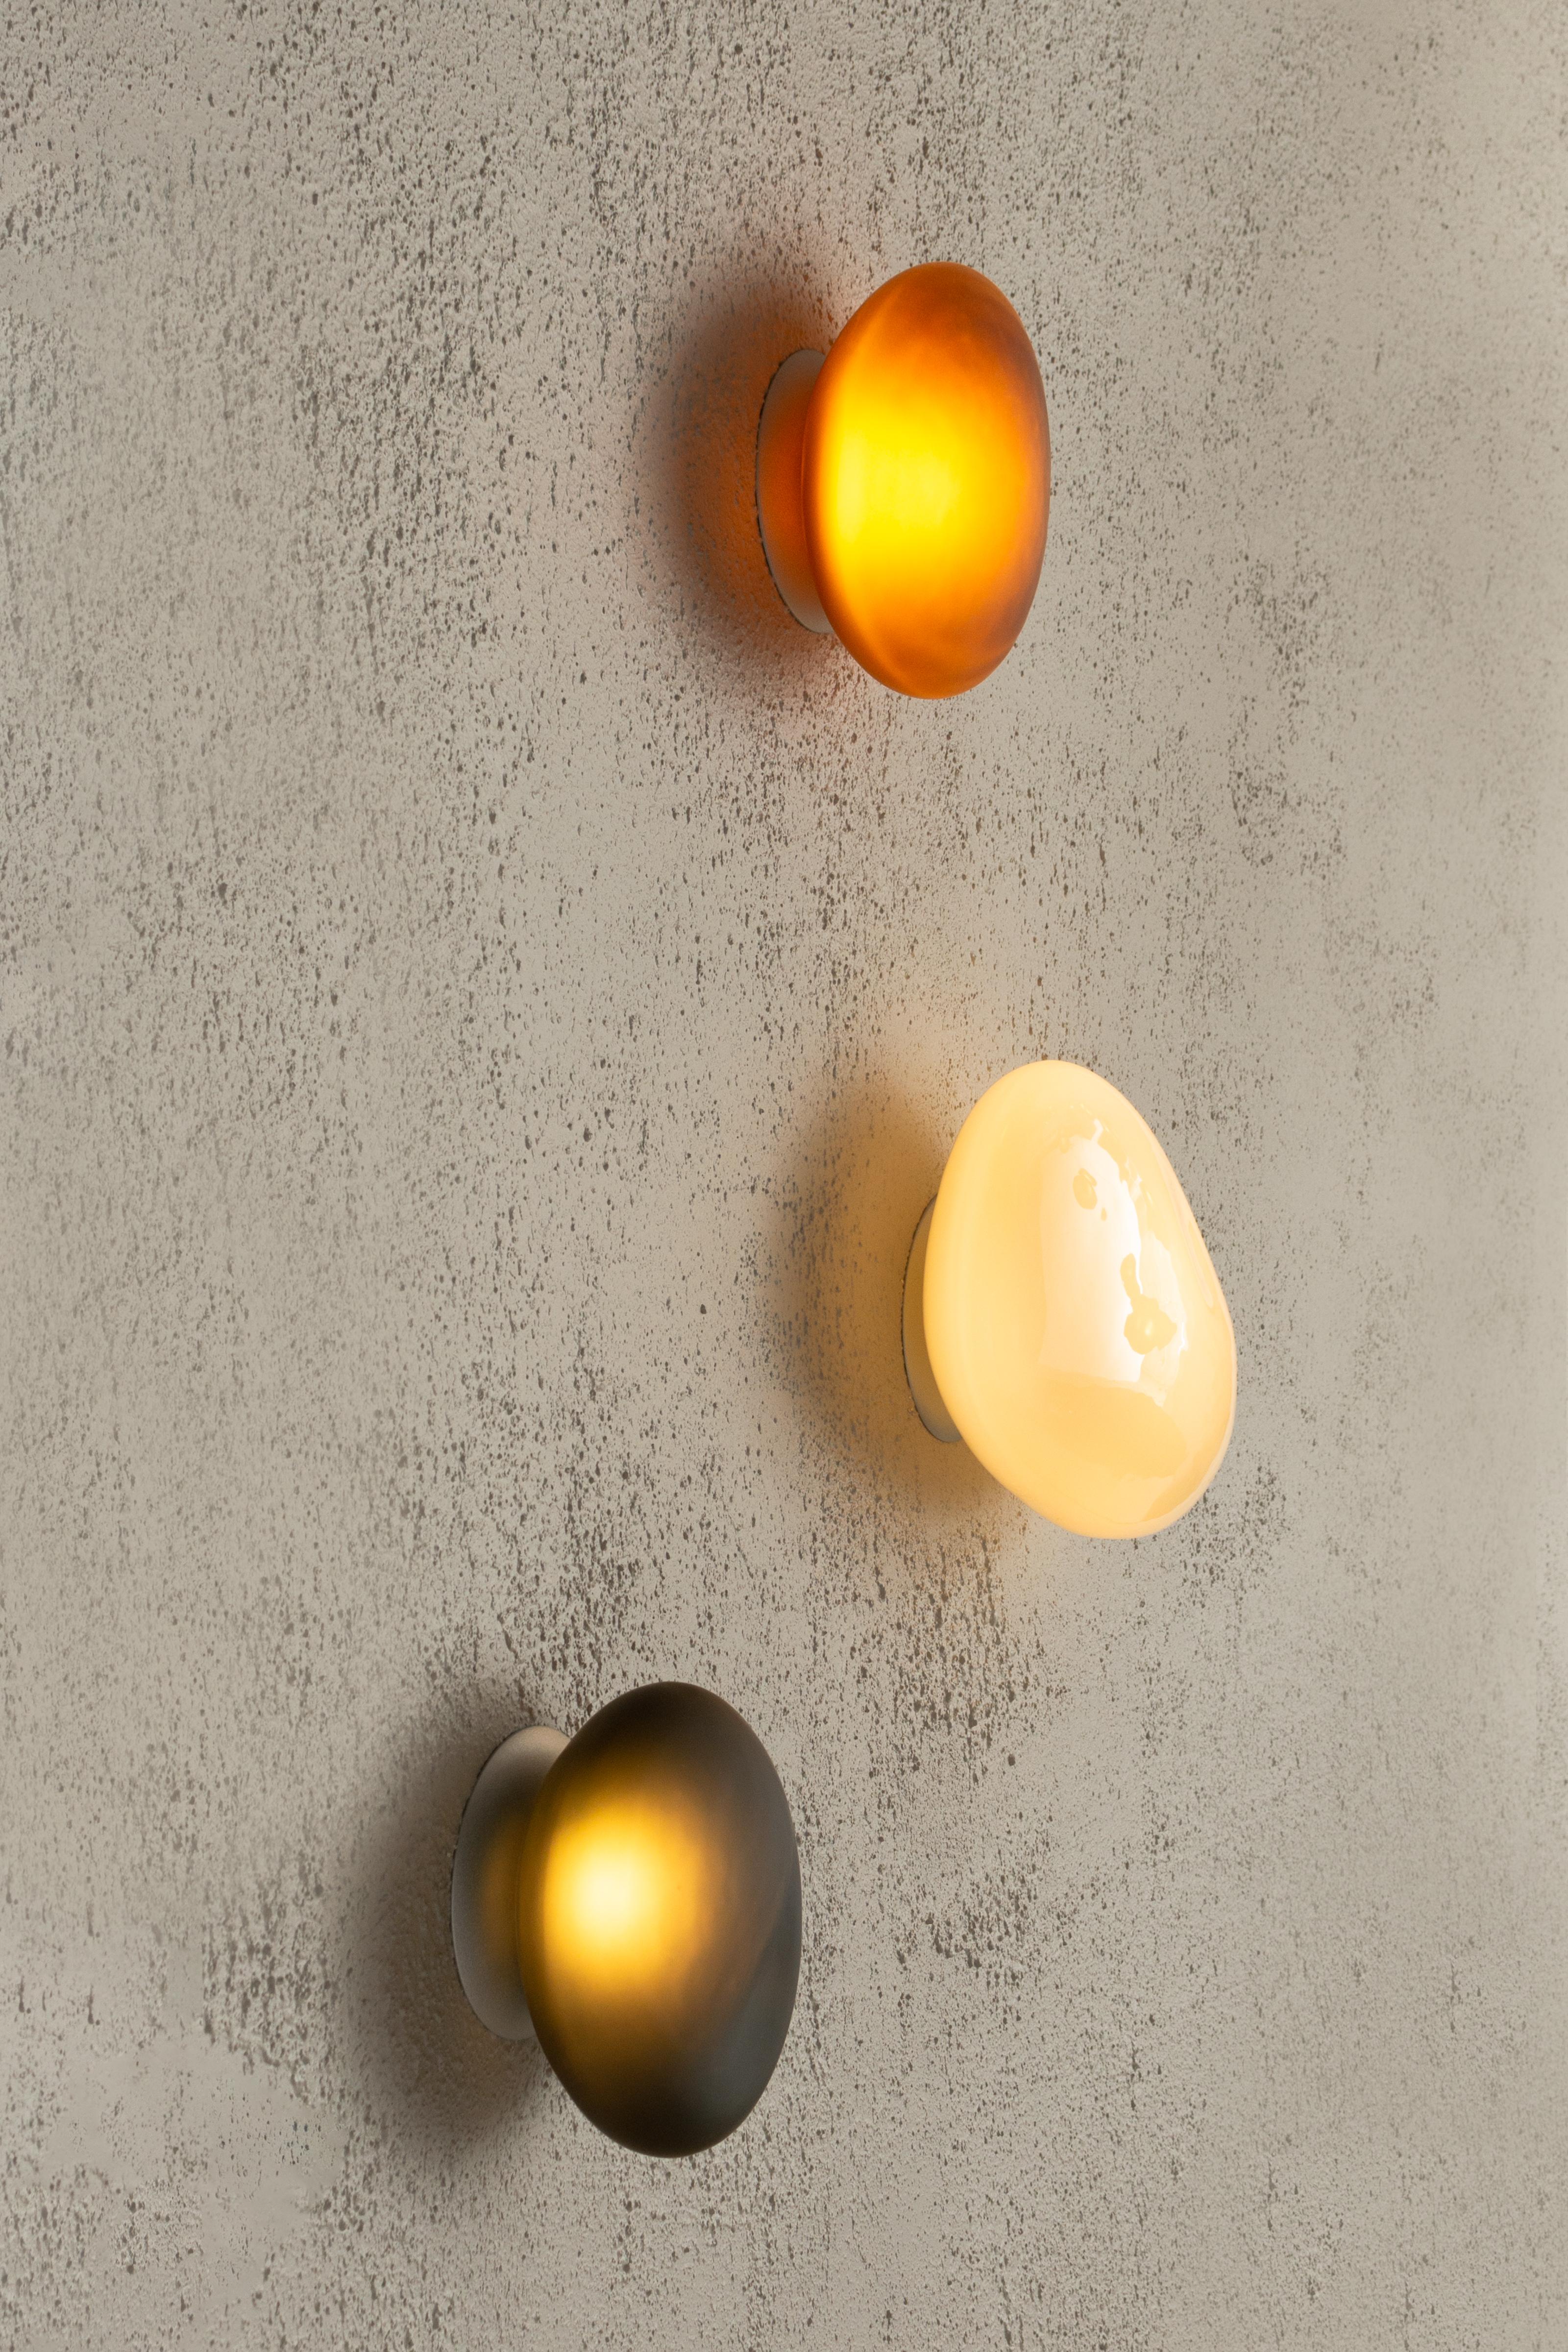 Contemporary wall lamp pebble. 

Electrical : 
Voltage: 110 – 277V / 220 – 240V
Integral LED source : 1 x 9W LED

The model shown in picture:
Dimensions: A: 30.5 x 21 x 18 cm 
Color: White
______
Pebble
The Pebble series celebrates the